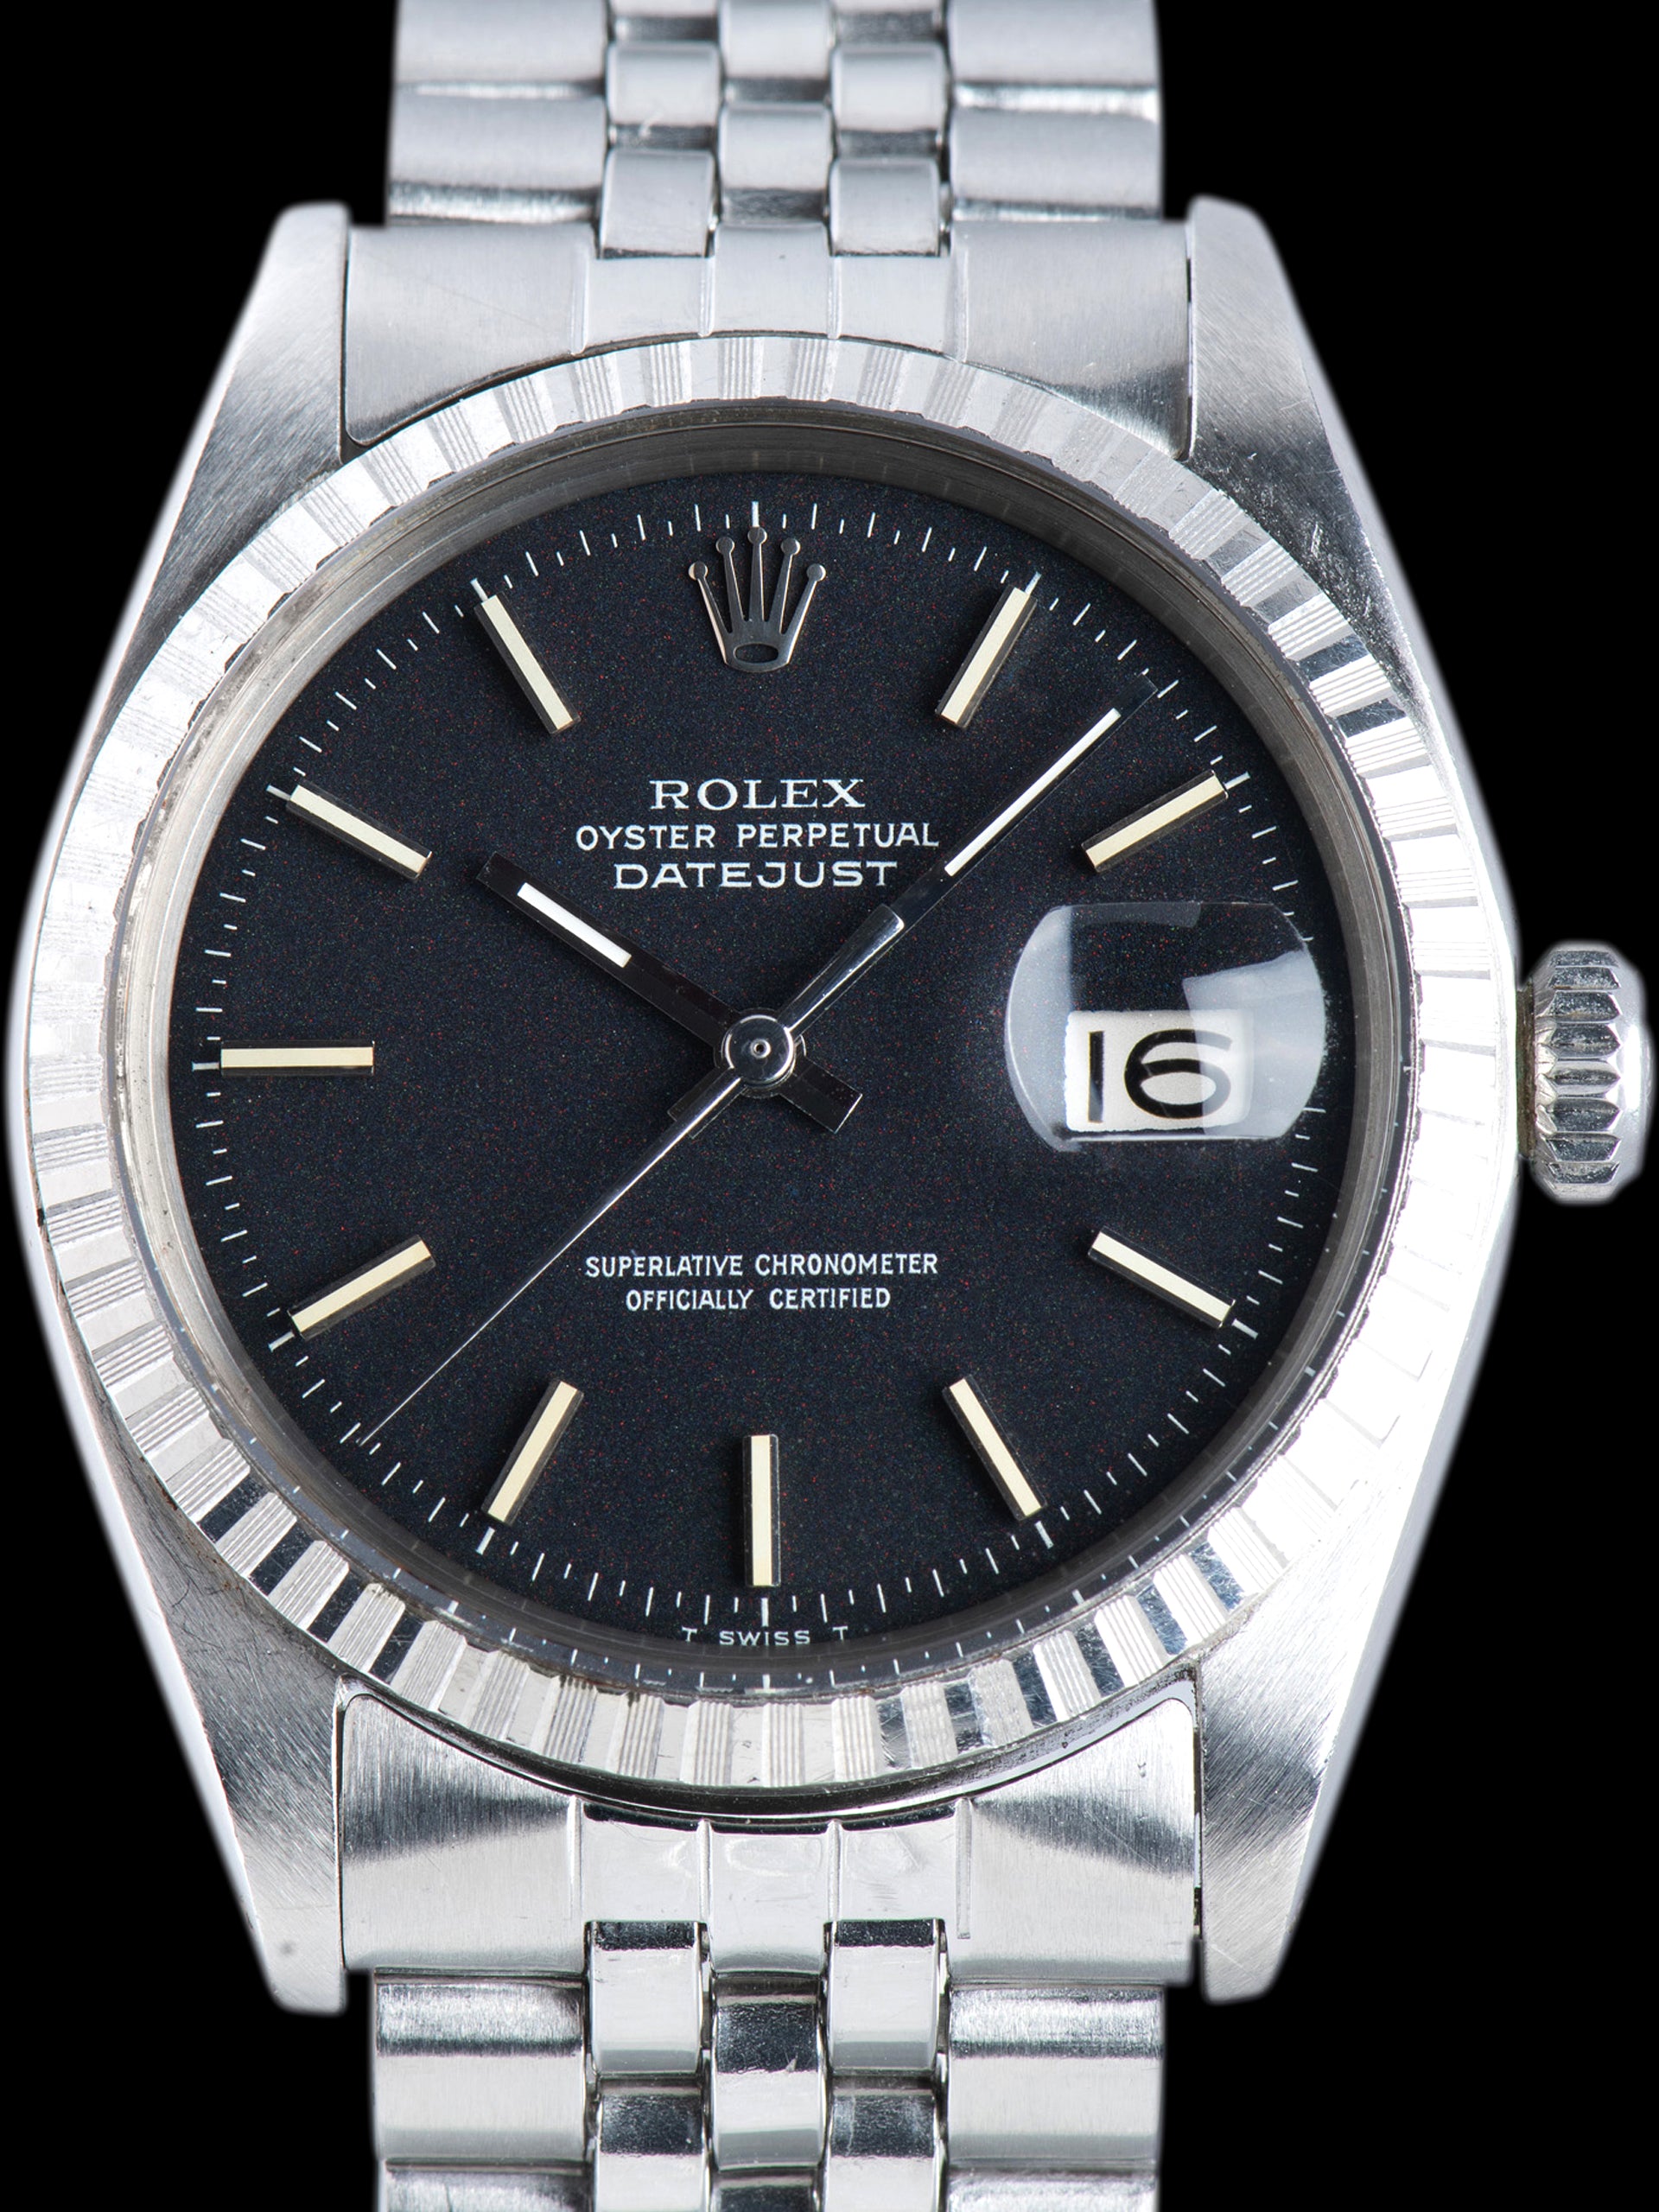 *Unpolished* 1968 Rolex Datejust (Ref. 1603) Black "Confetti" Dial W/ Double Punched Papers